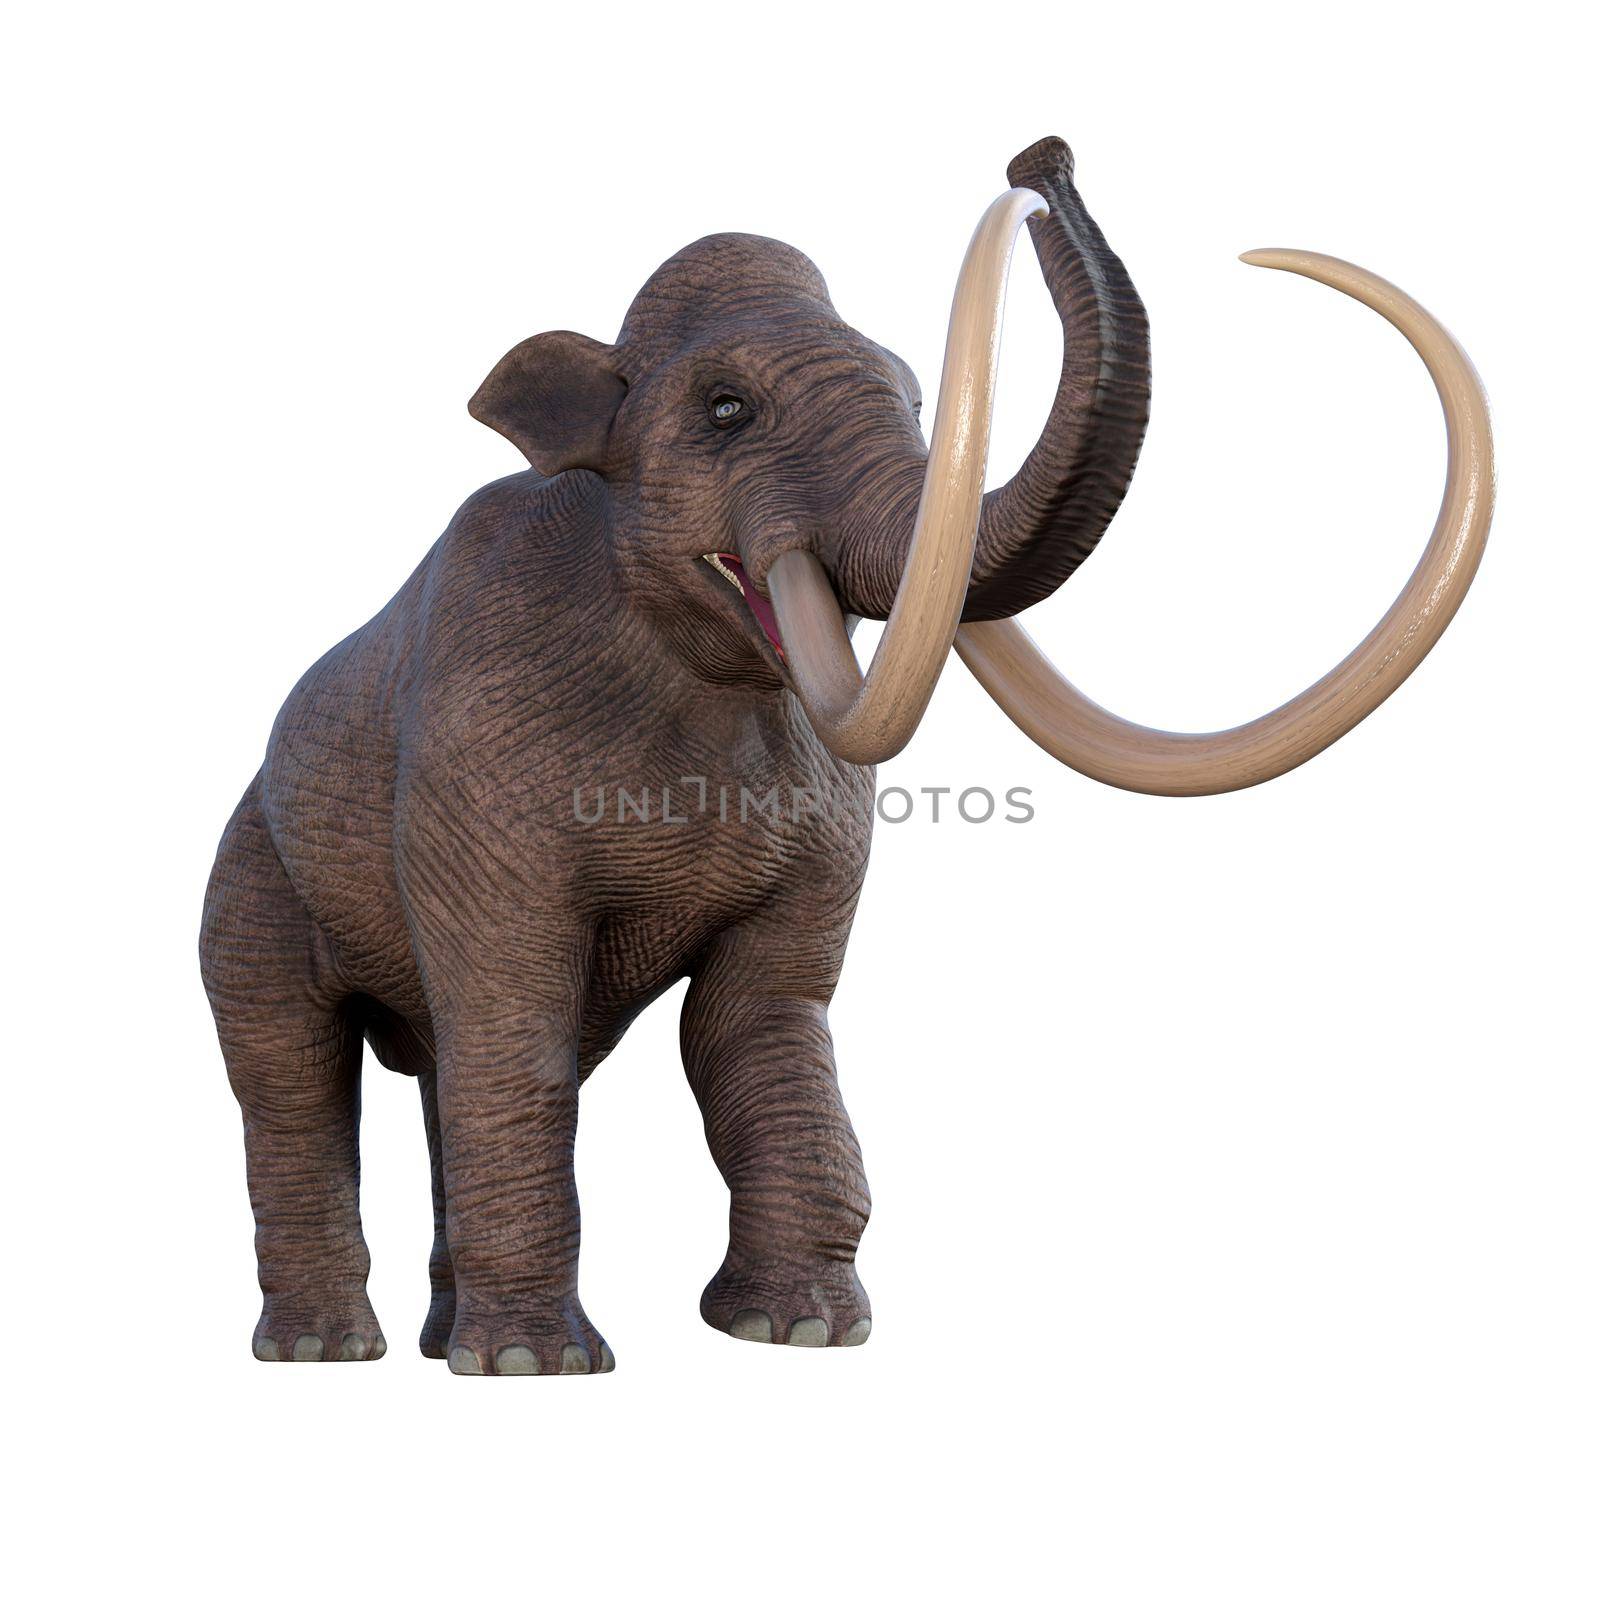 Columbian Mammoth was an elephant that lived in the Pleistocene Period of North America.